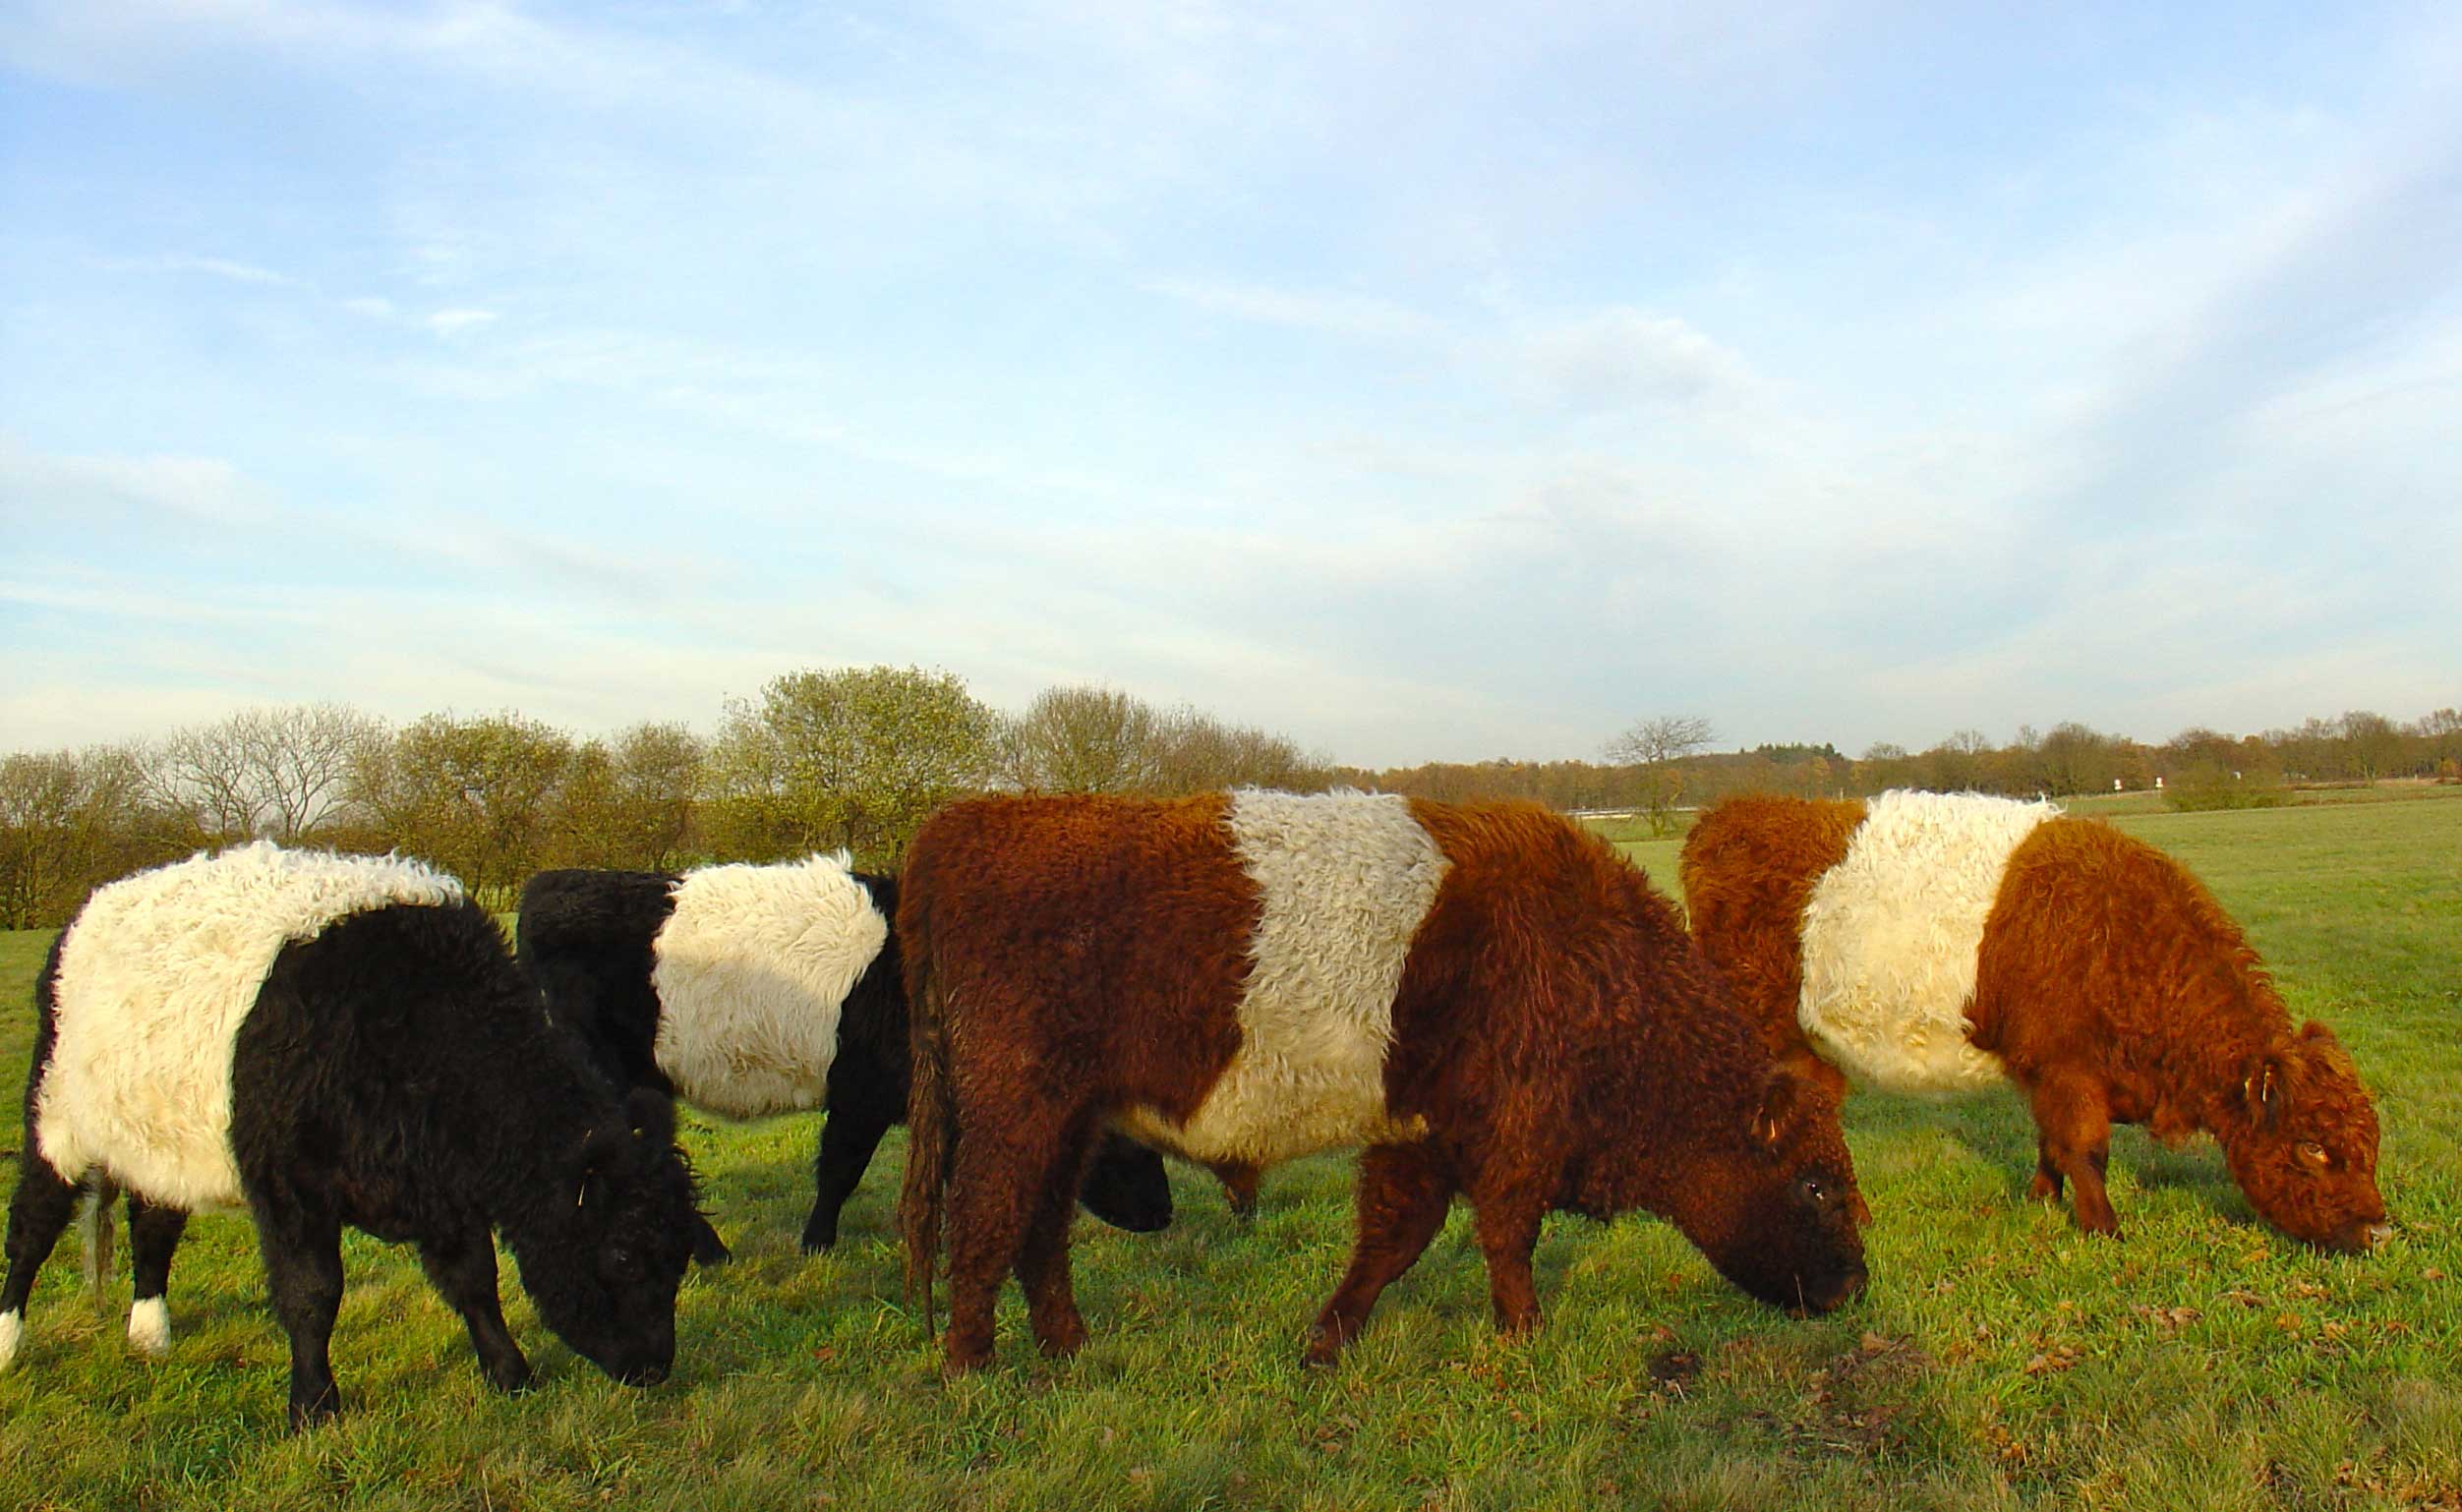 Belted galloway cattle